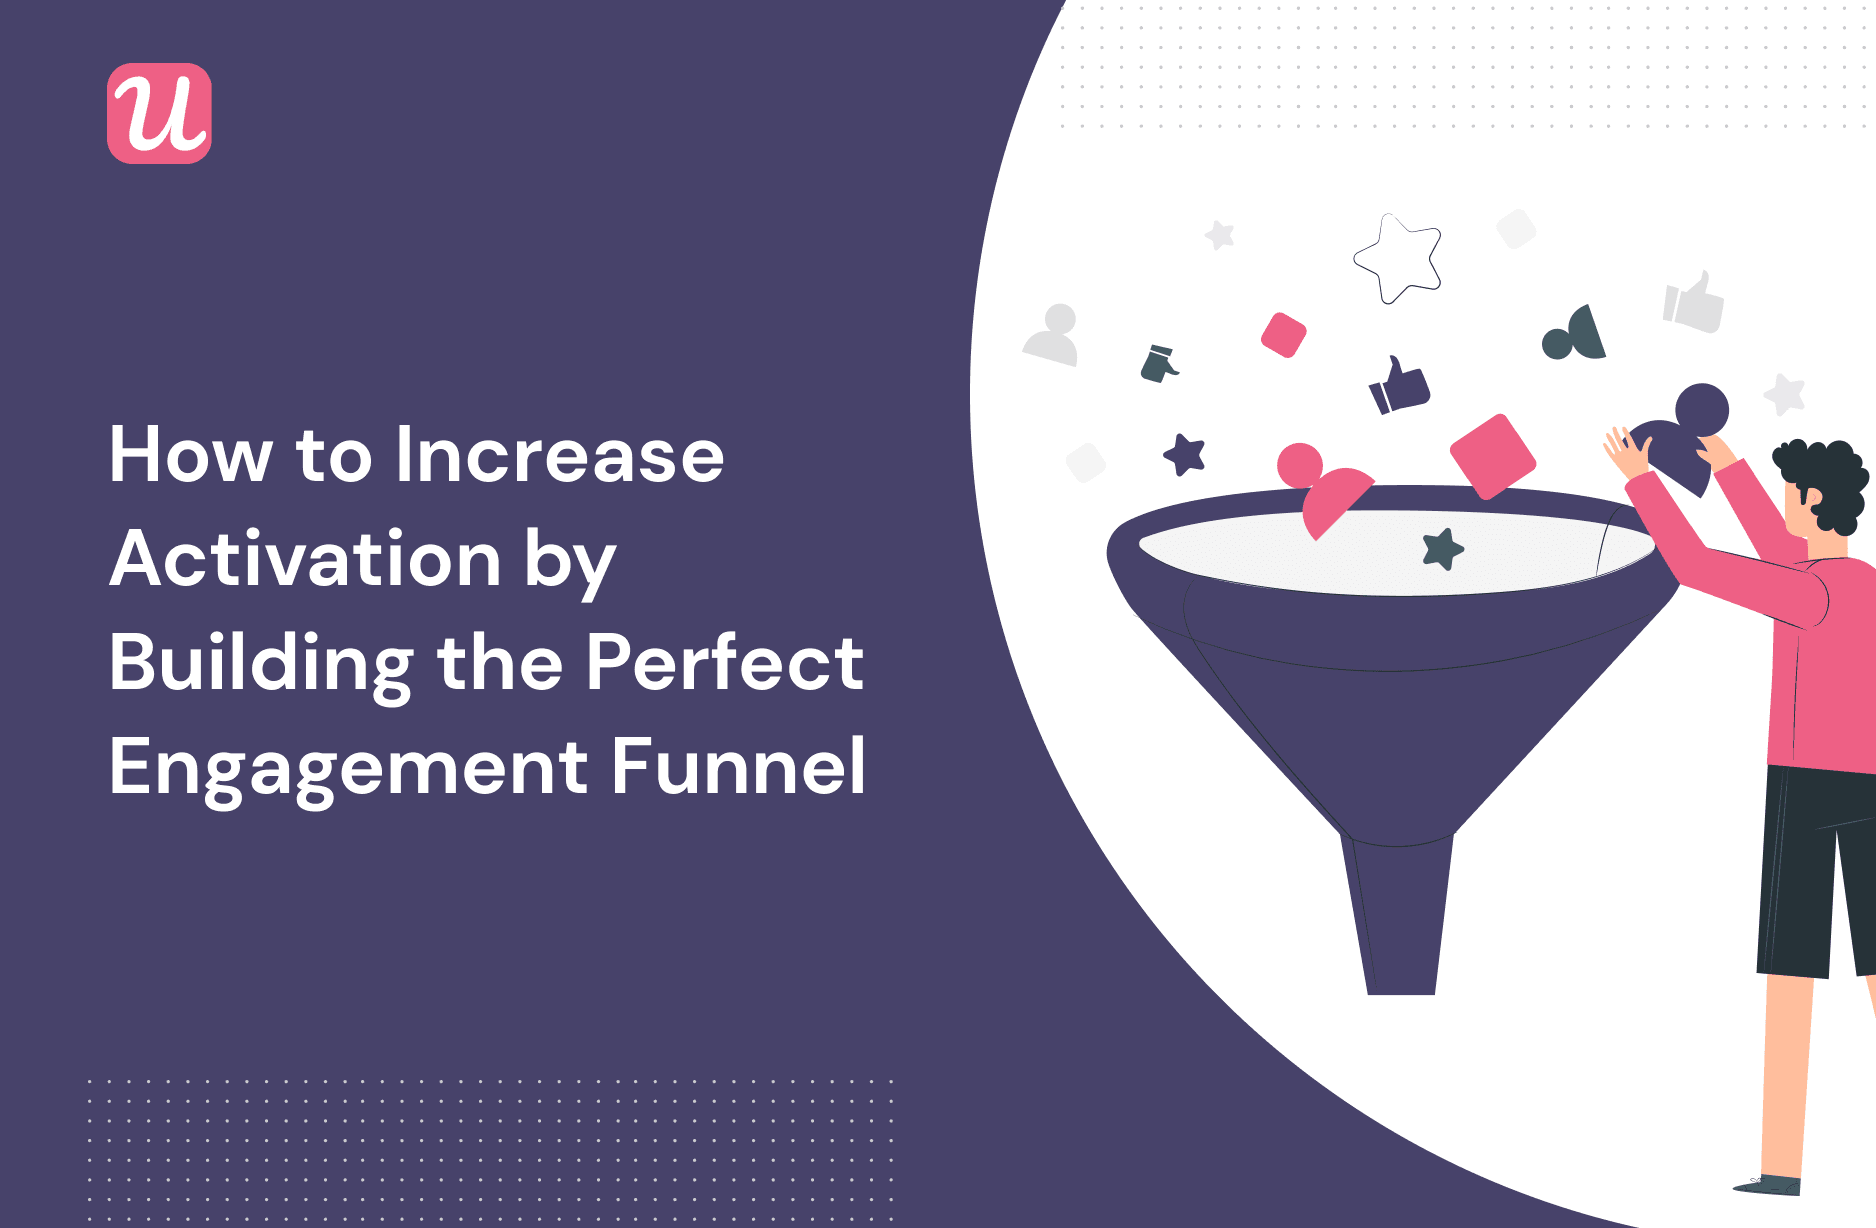 How To Increase Activation By Building The Perfect Engagement Funnel